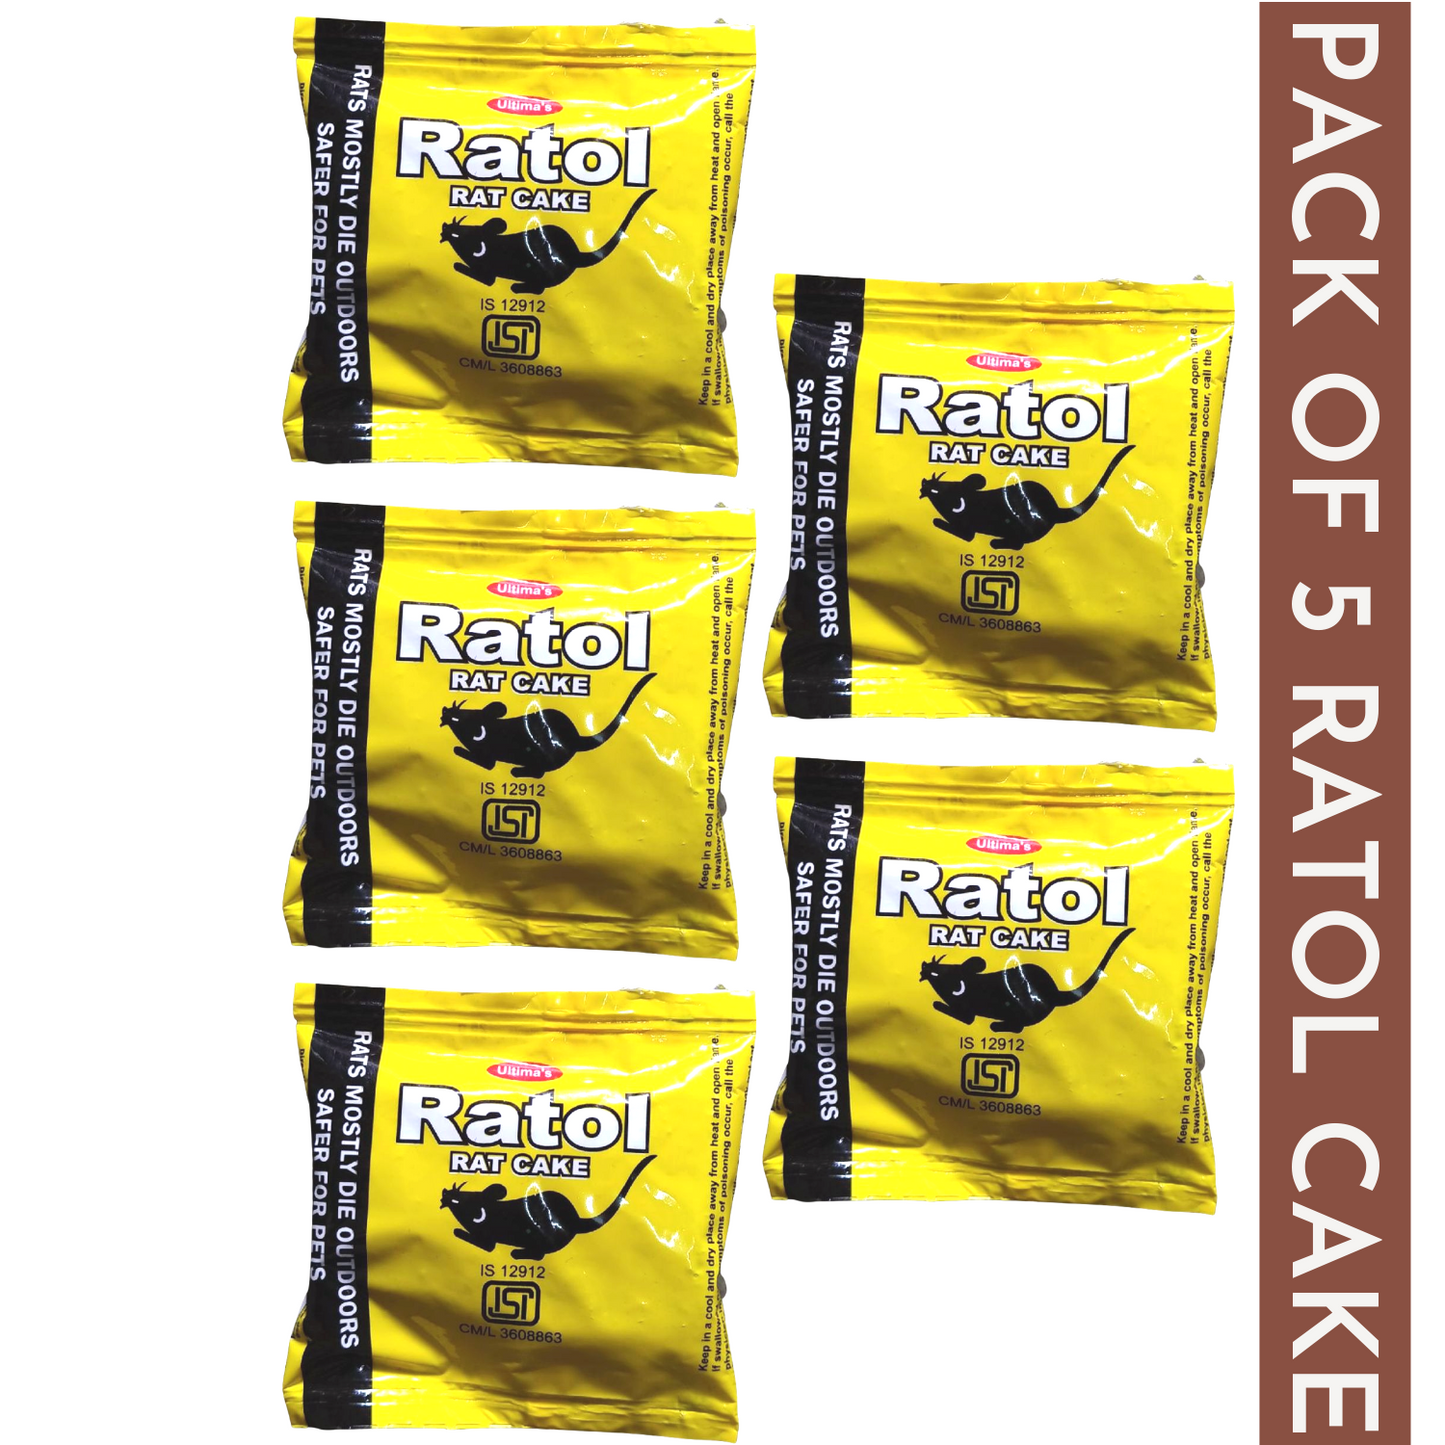 Rat Kill Cake for Car Home Outdoor | Ready to Use Rat Killer Bait | East to Use | Rats Mostly Die Outside 25gmX5